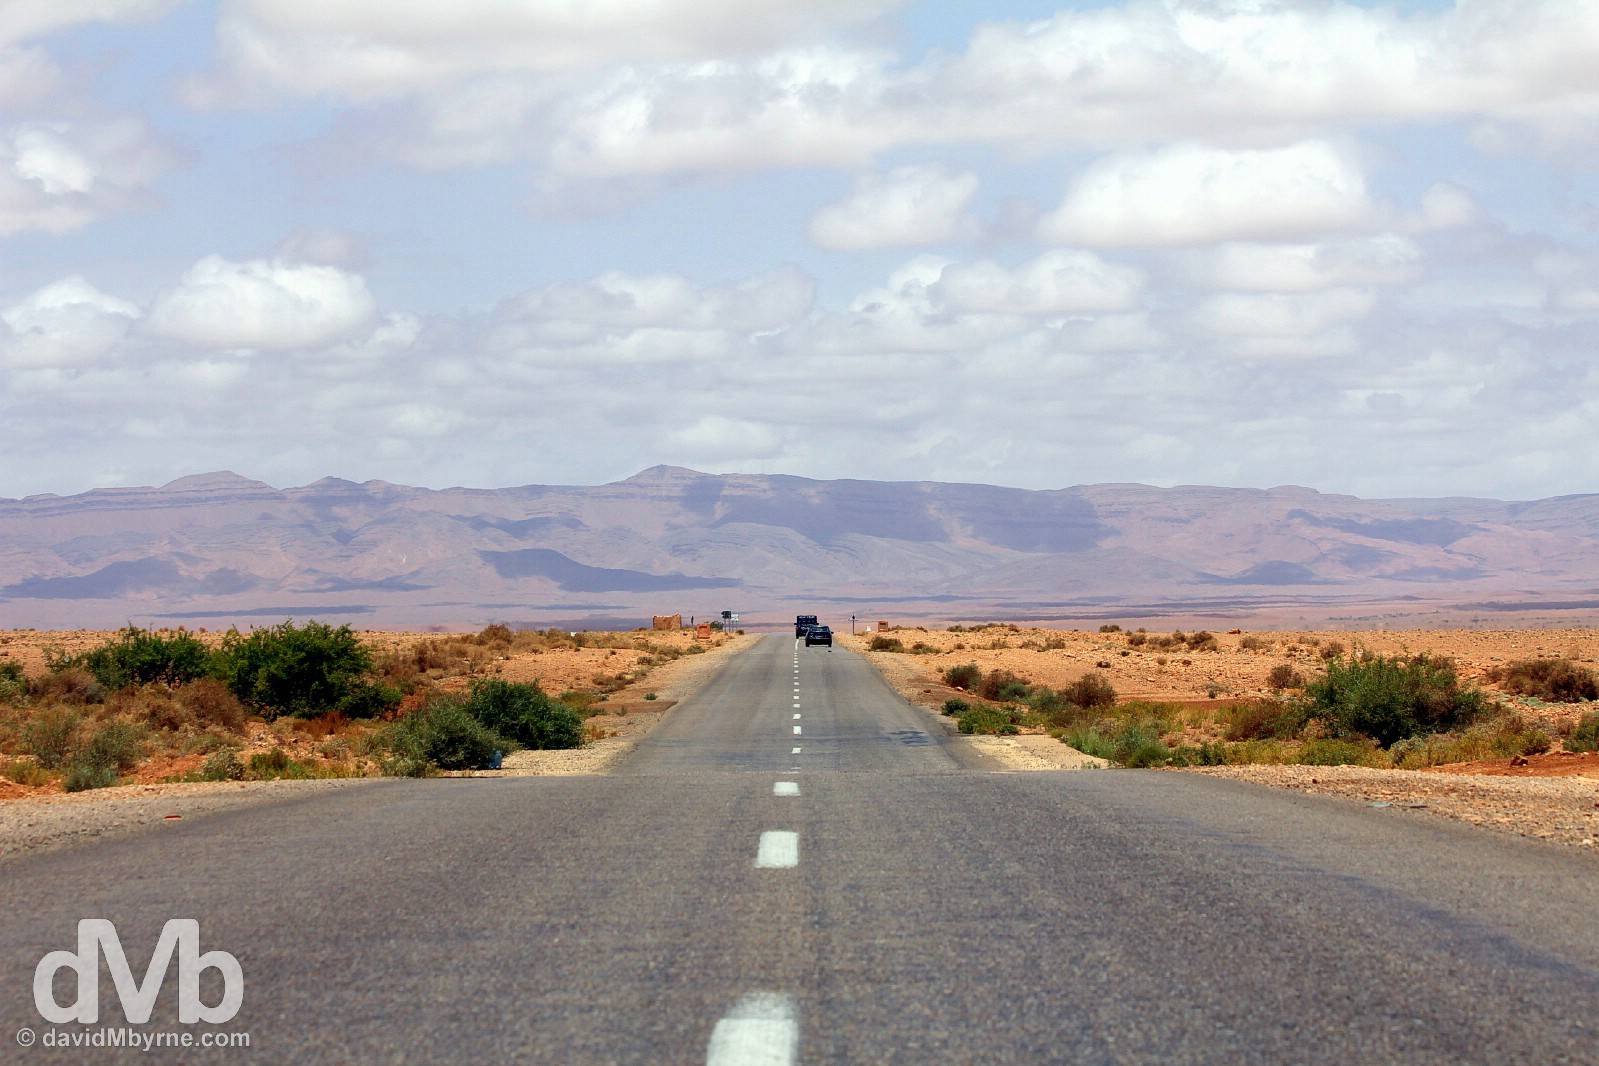 Road trip. The N13 between Er Rachidia and Merzouga, southeastern Morocco. May 19, 2014. 